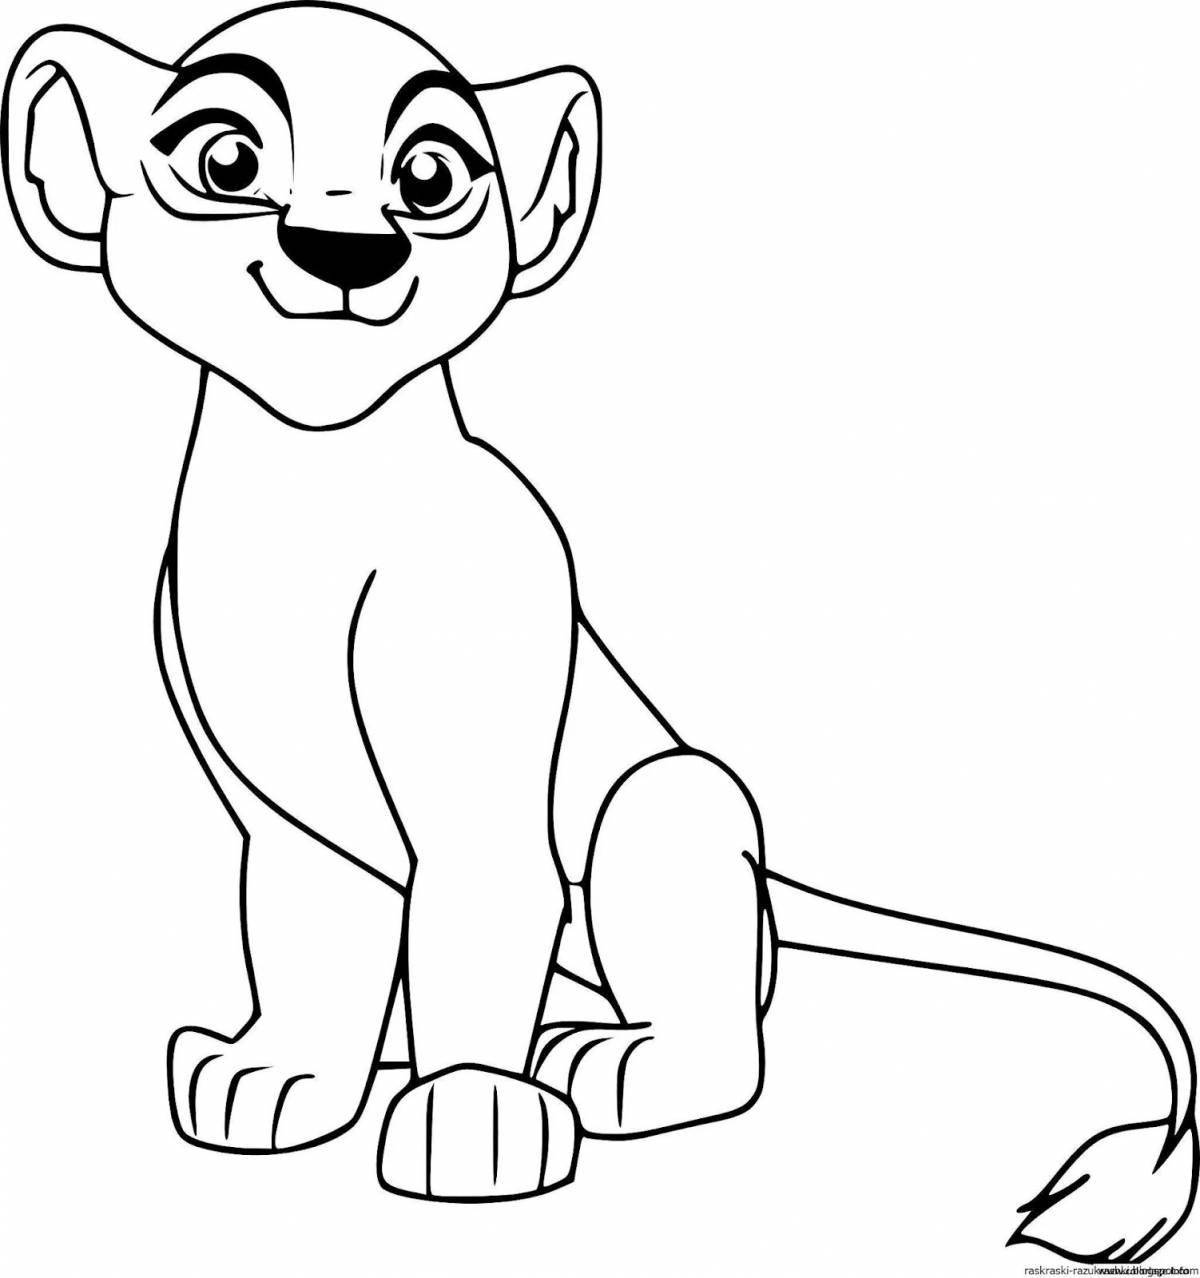 Coloring page funny meerkat